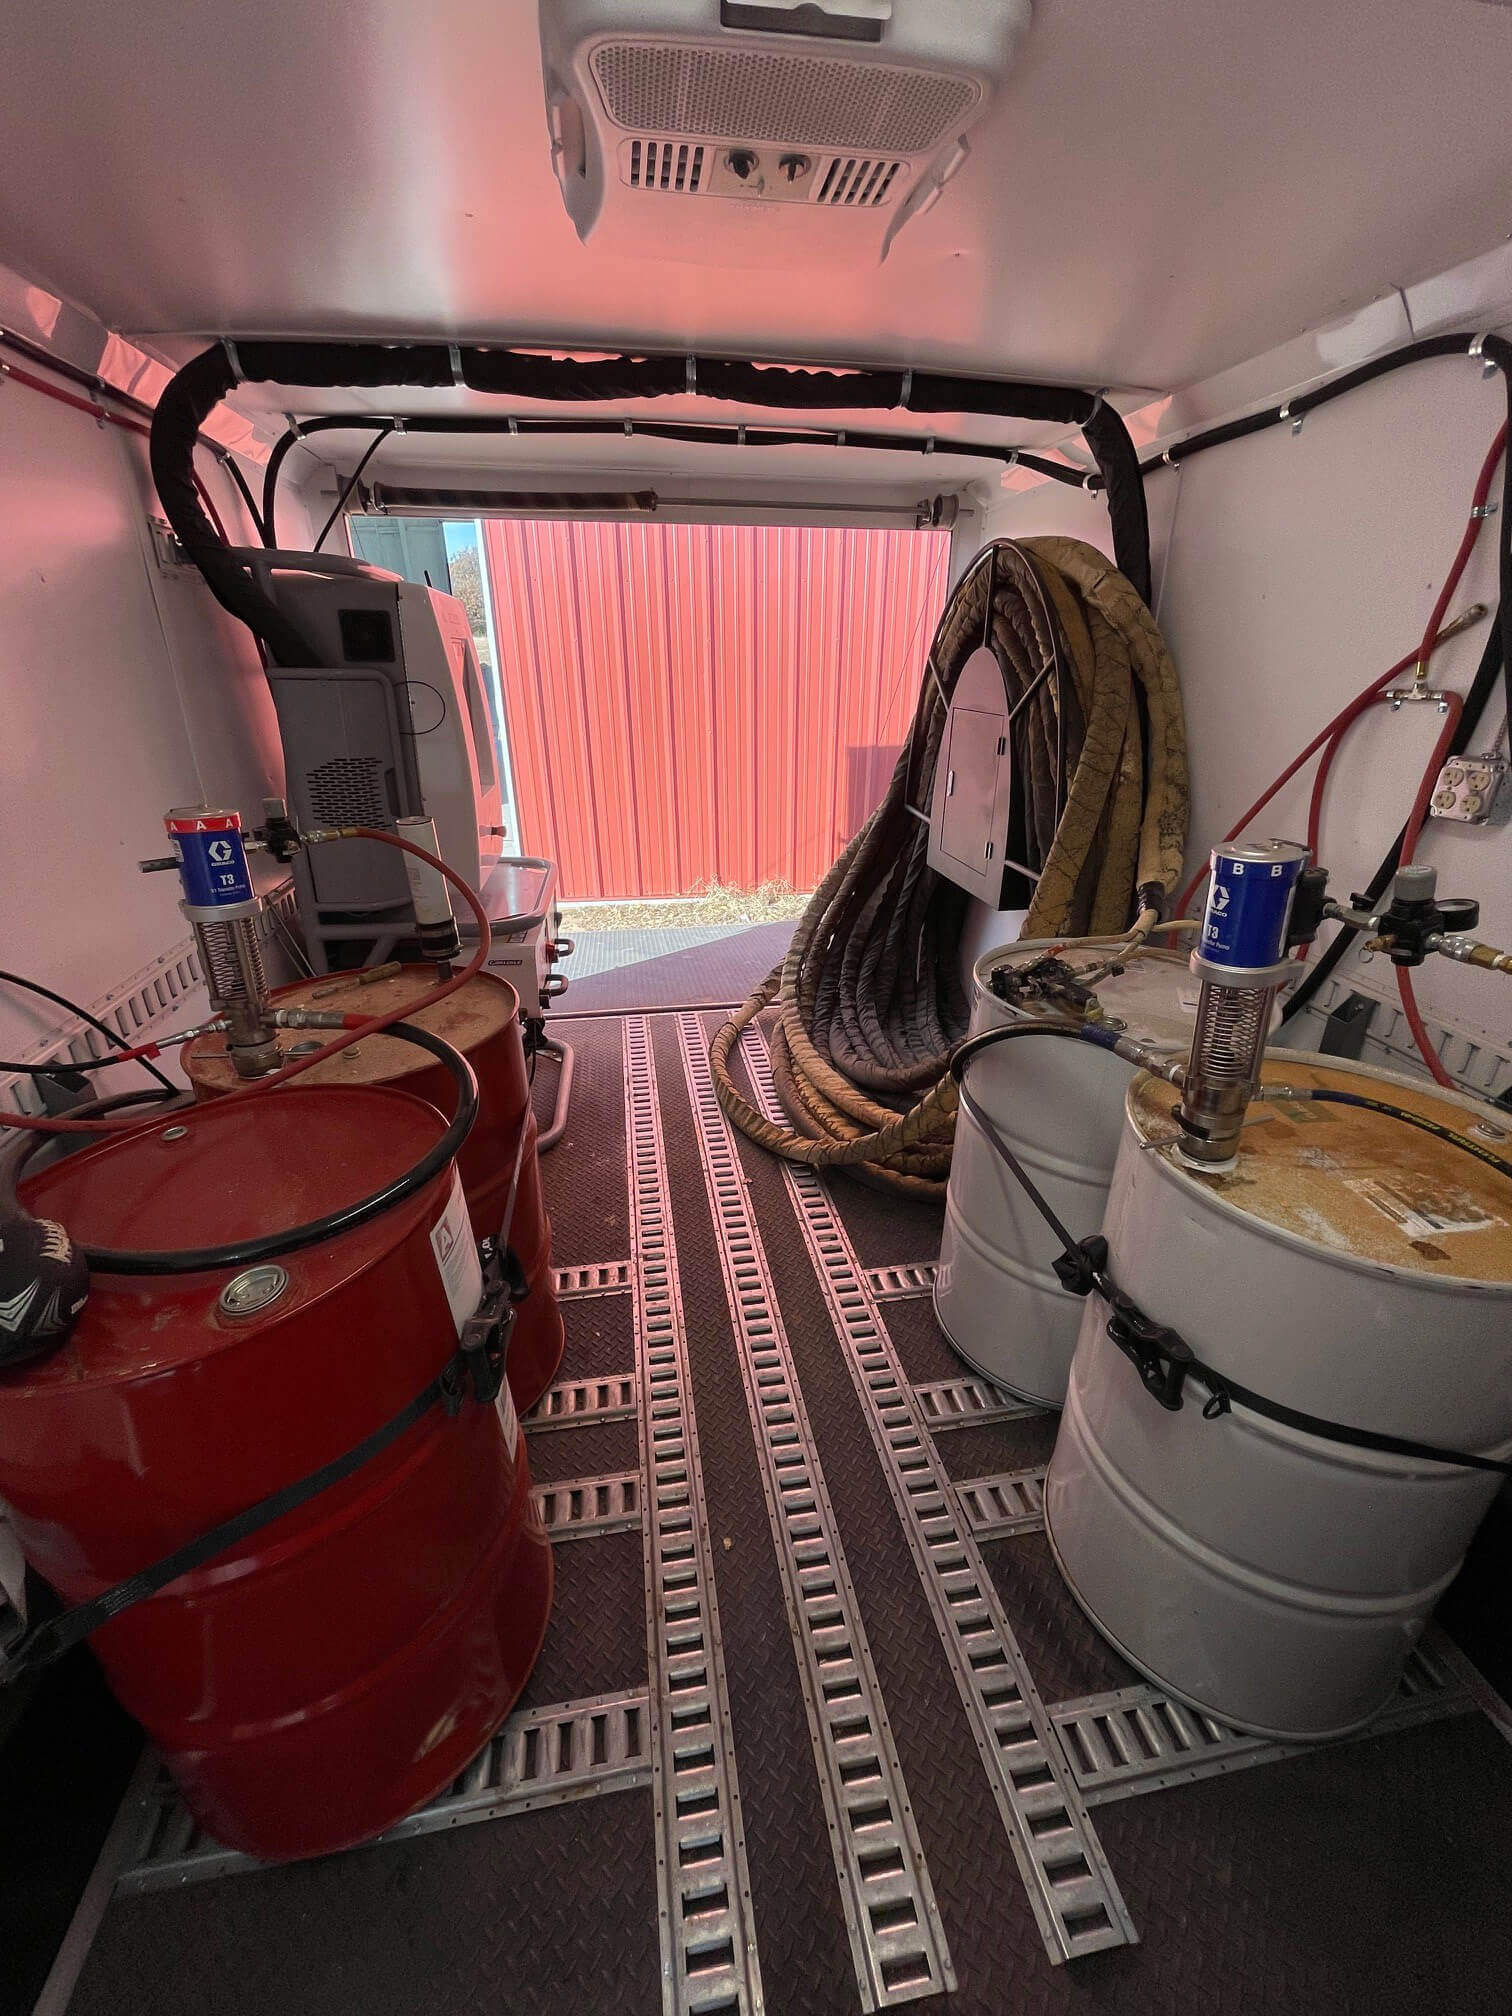 Inside of work truck featuring colored barrels and tubing